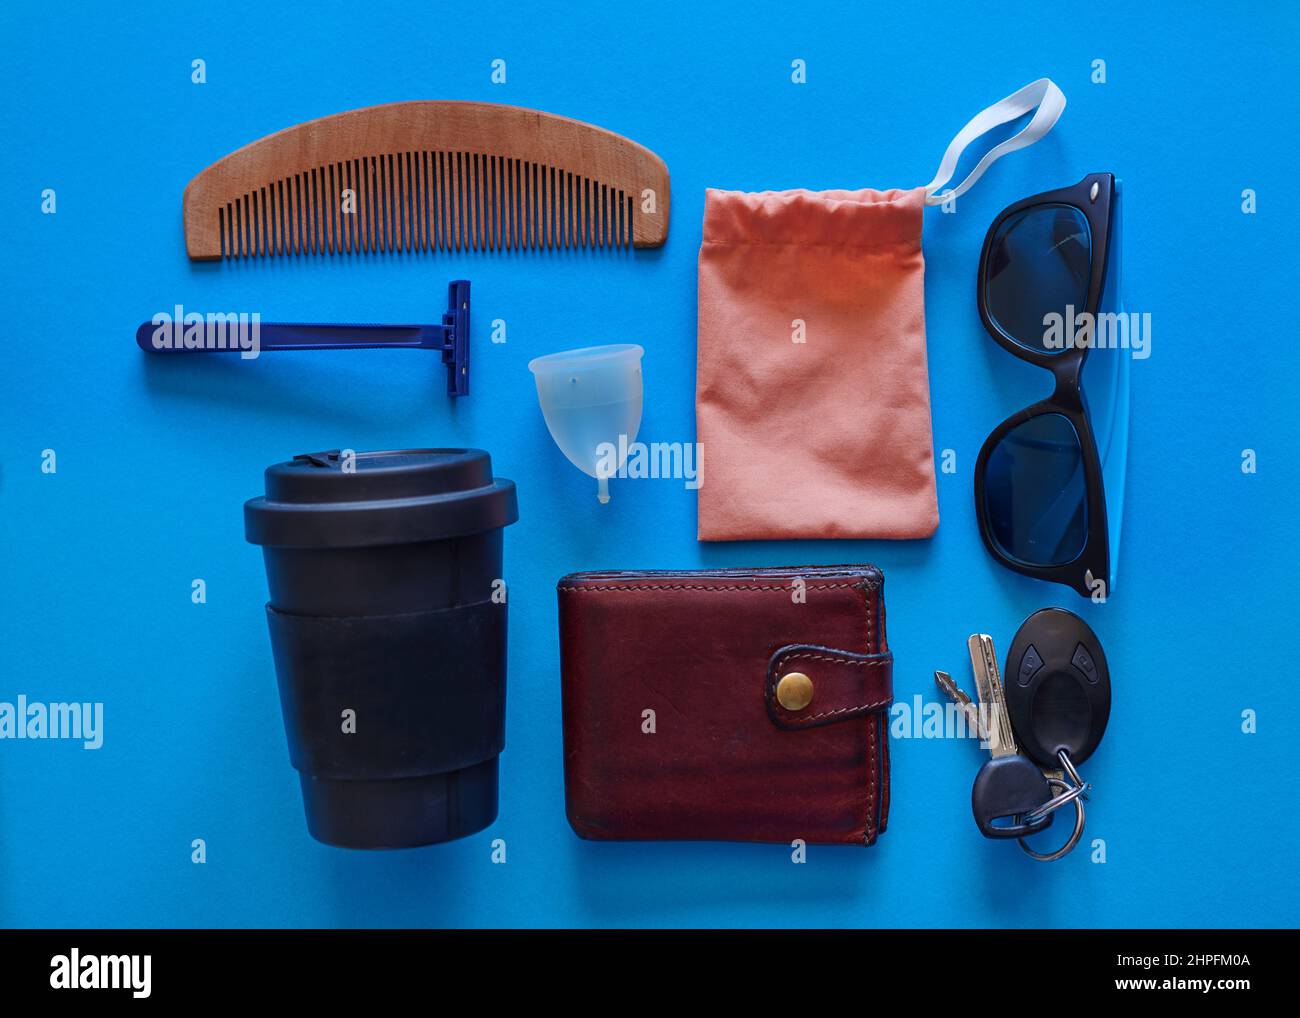 A flat lay showing gender diverse lifestyle objects with a menstrual cup Stock Photo